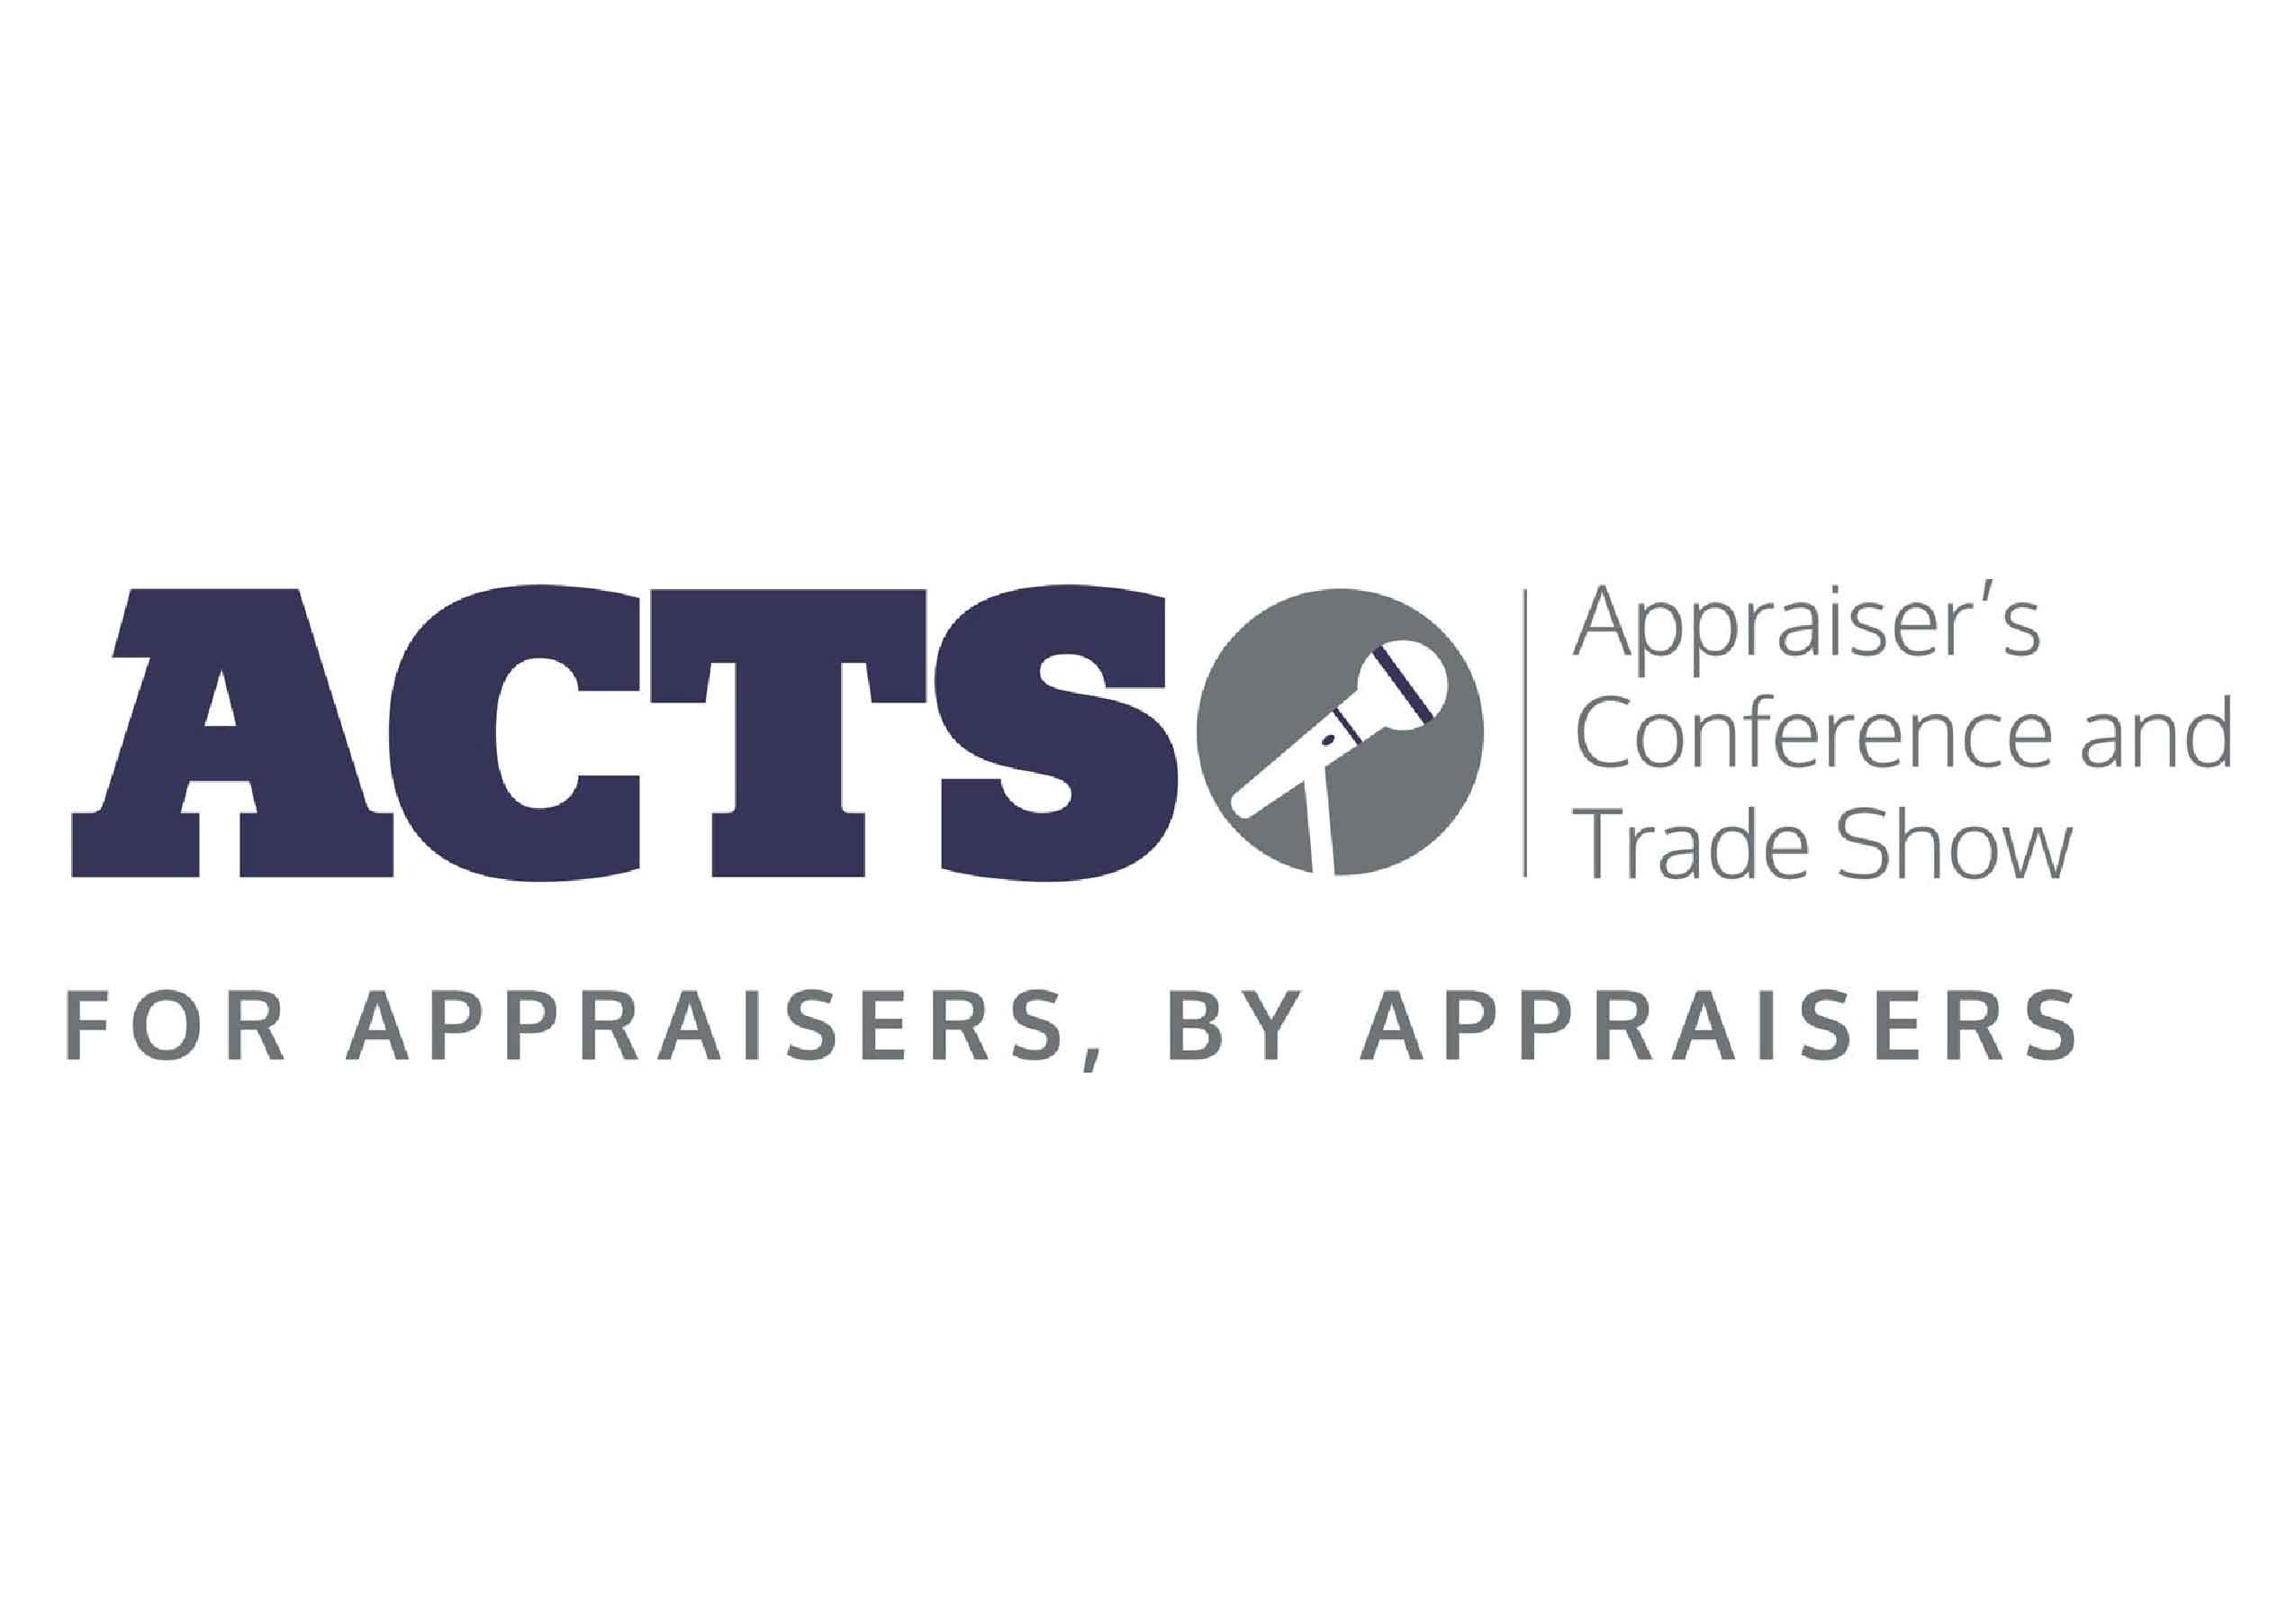 Appraiser Conference & Trade Show (ACTS)